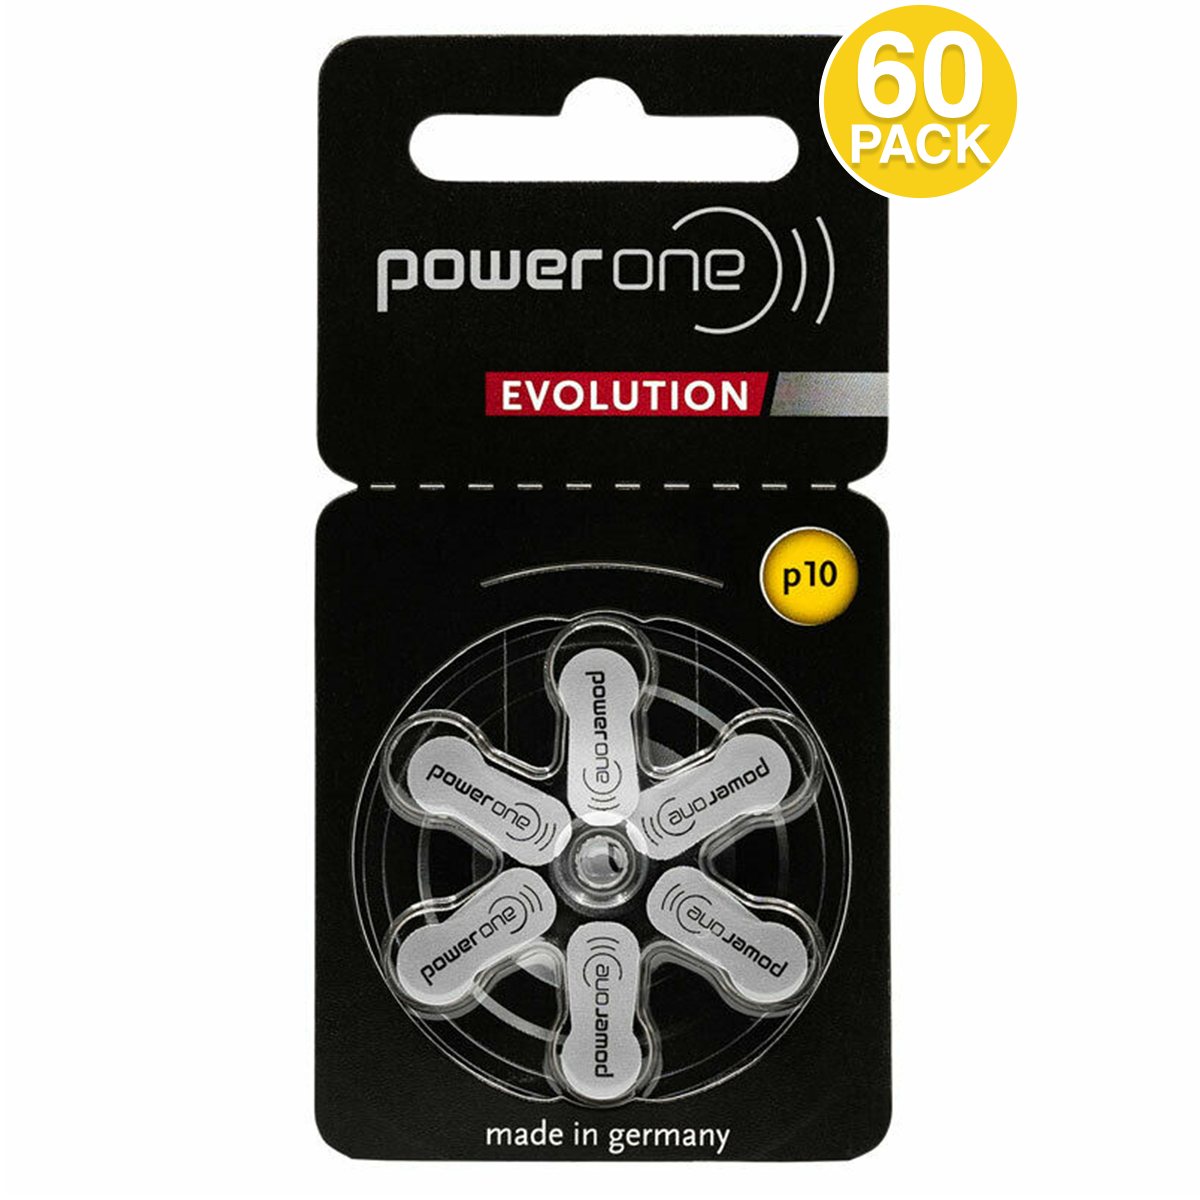 Power One Evolution Size 10 Hearing Aid Batteries (60 PCS)